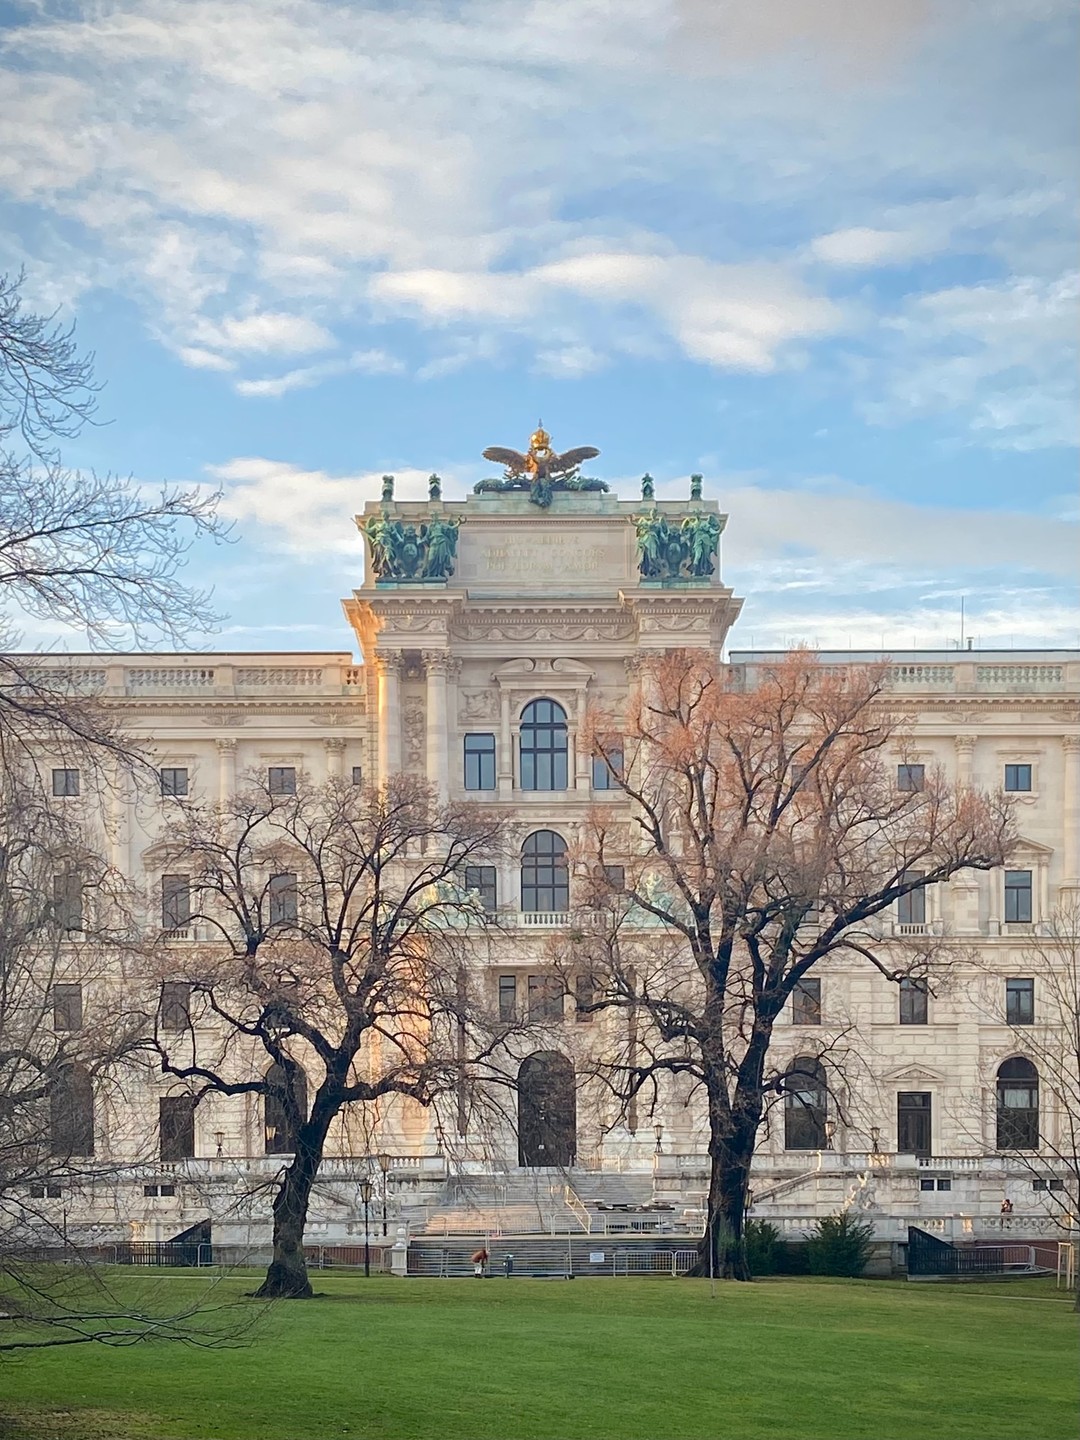 Vienna's Hofburg Palace: One of the best romantic getaways for couples who love culture. 